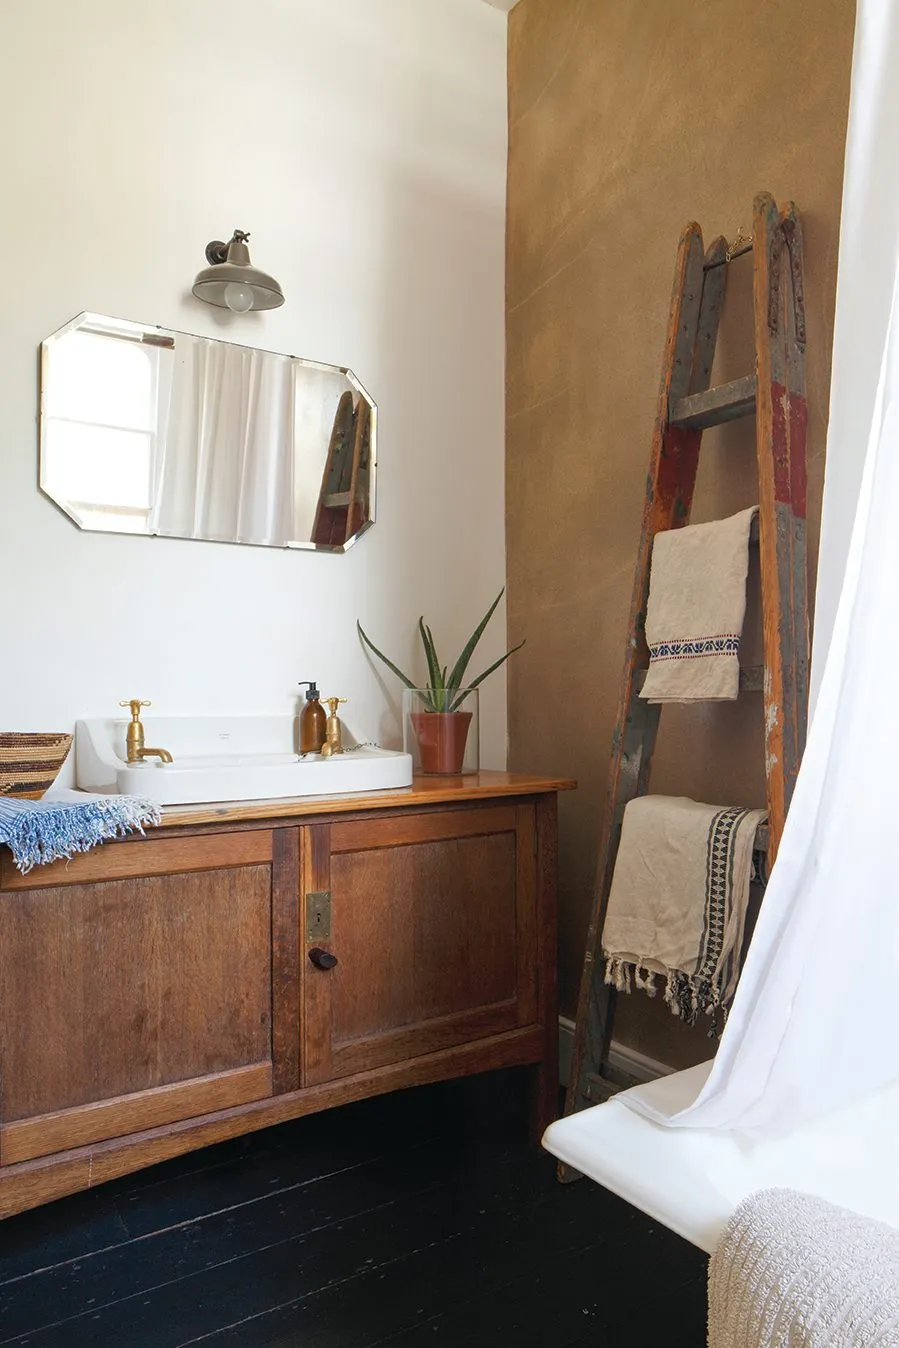 27 Bathroom Ideas For an Uplifting Space - Homes and Antiques